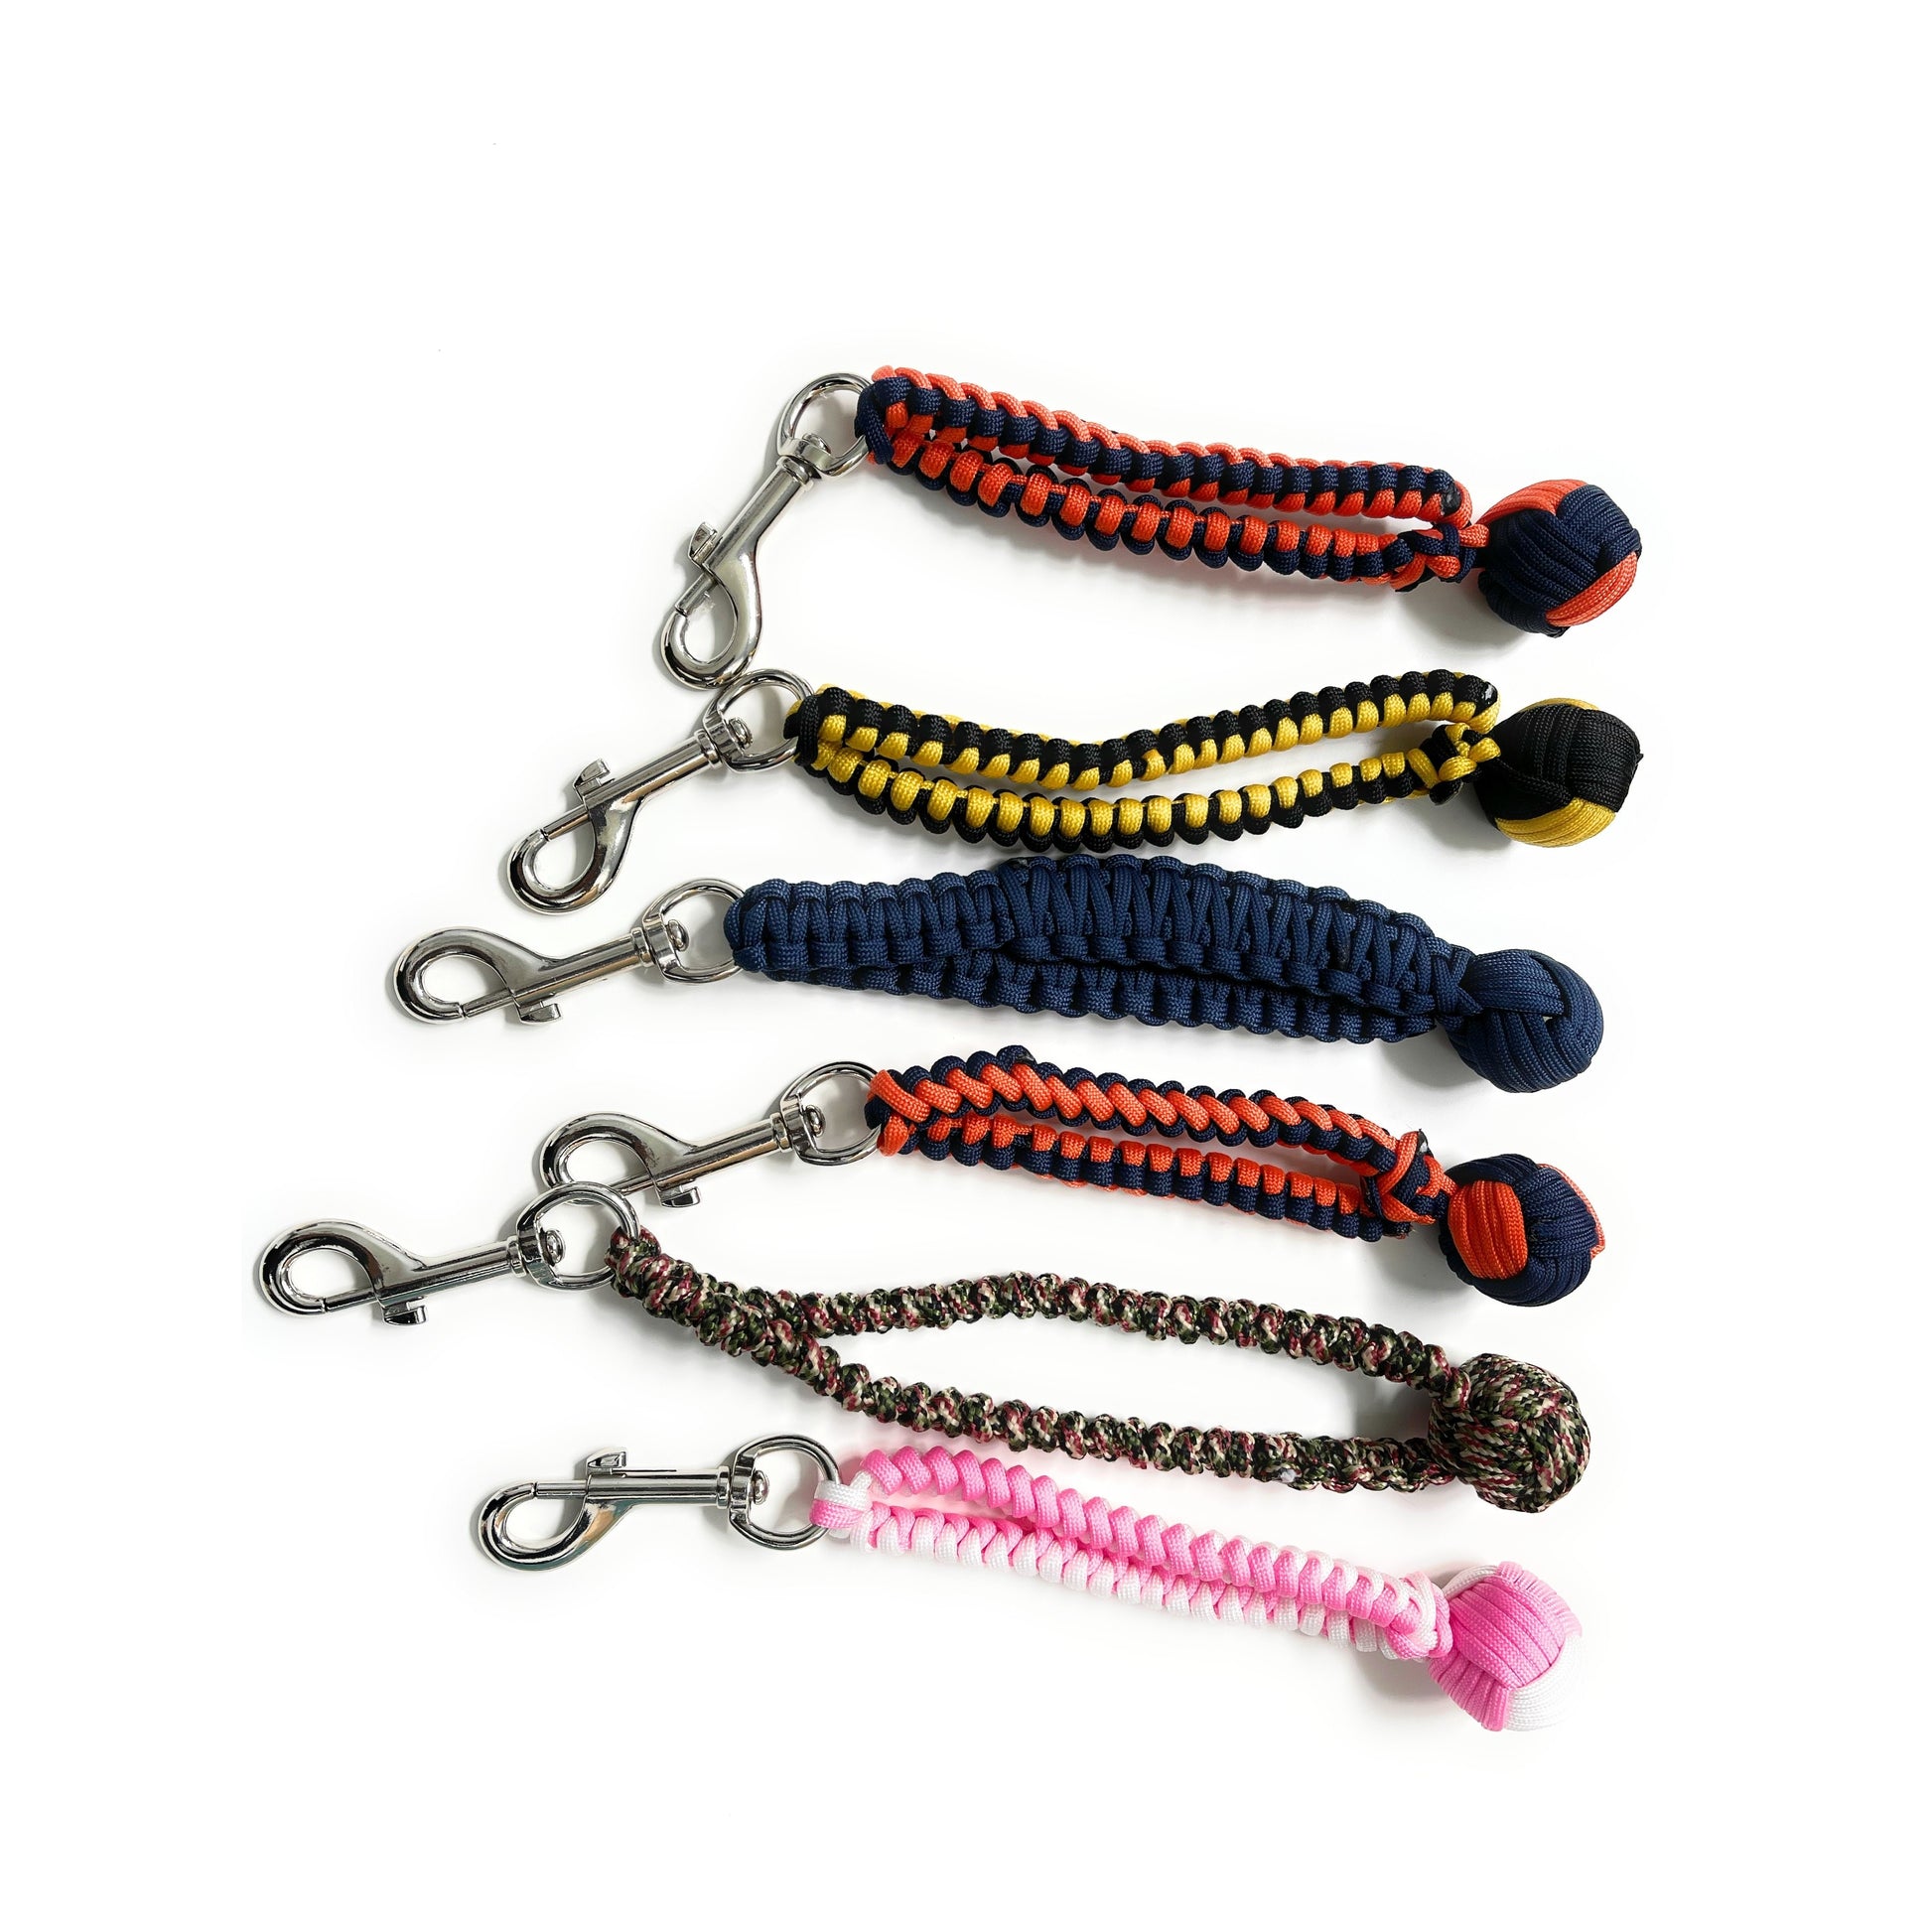 Paracord Monkey Fist Keychain, Accessories, 550 Paracord, Steel Ball  Bearing, Wooden Ball, Gift, Unisex Adult Keychain 